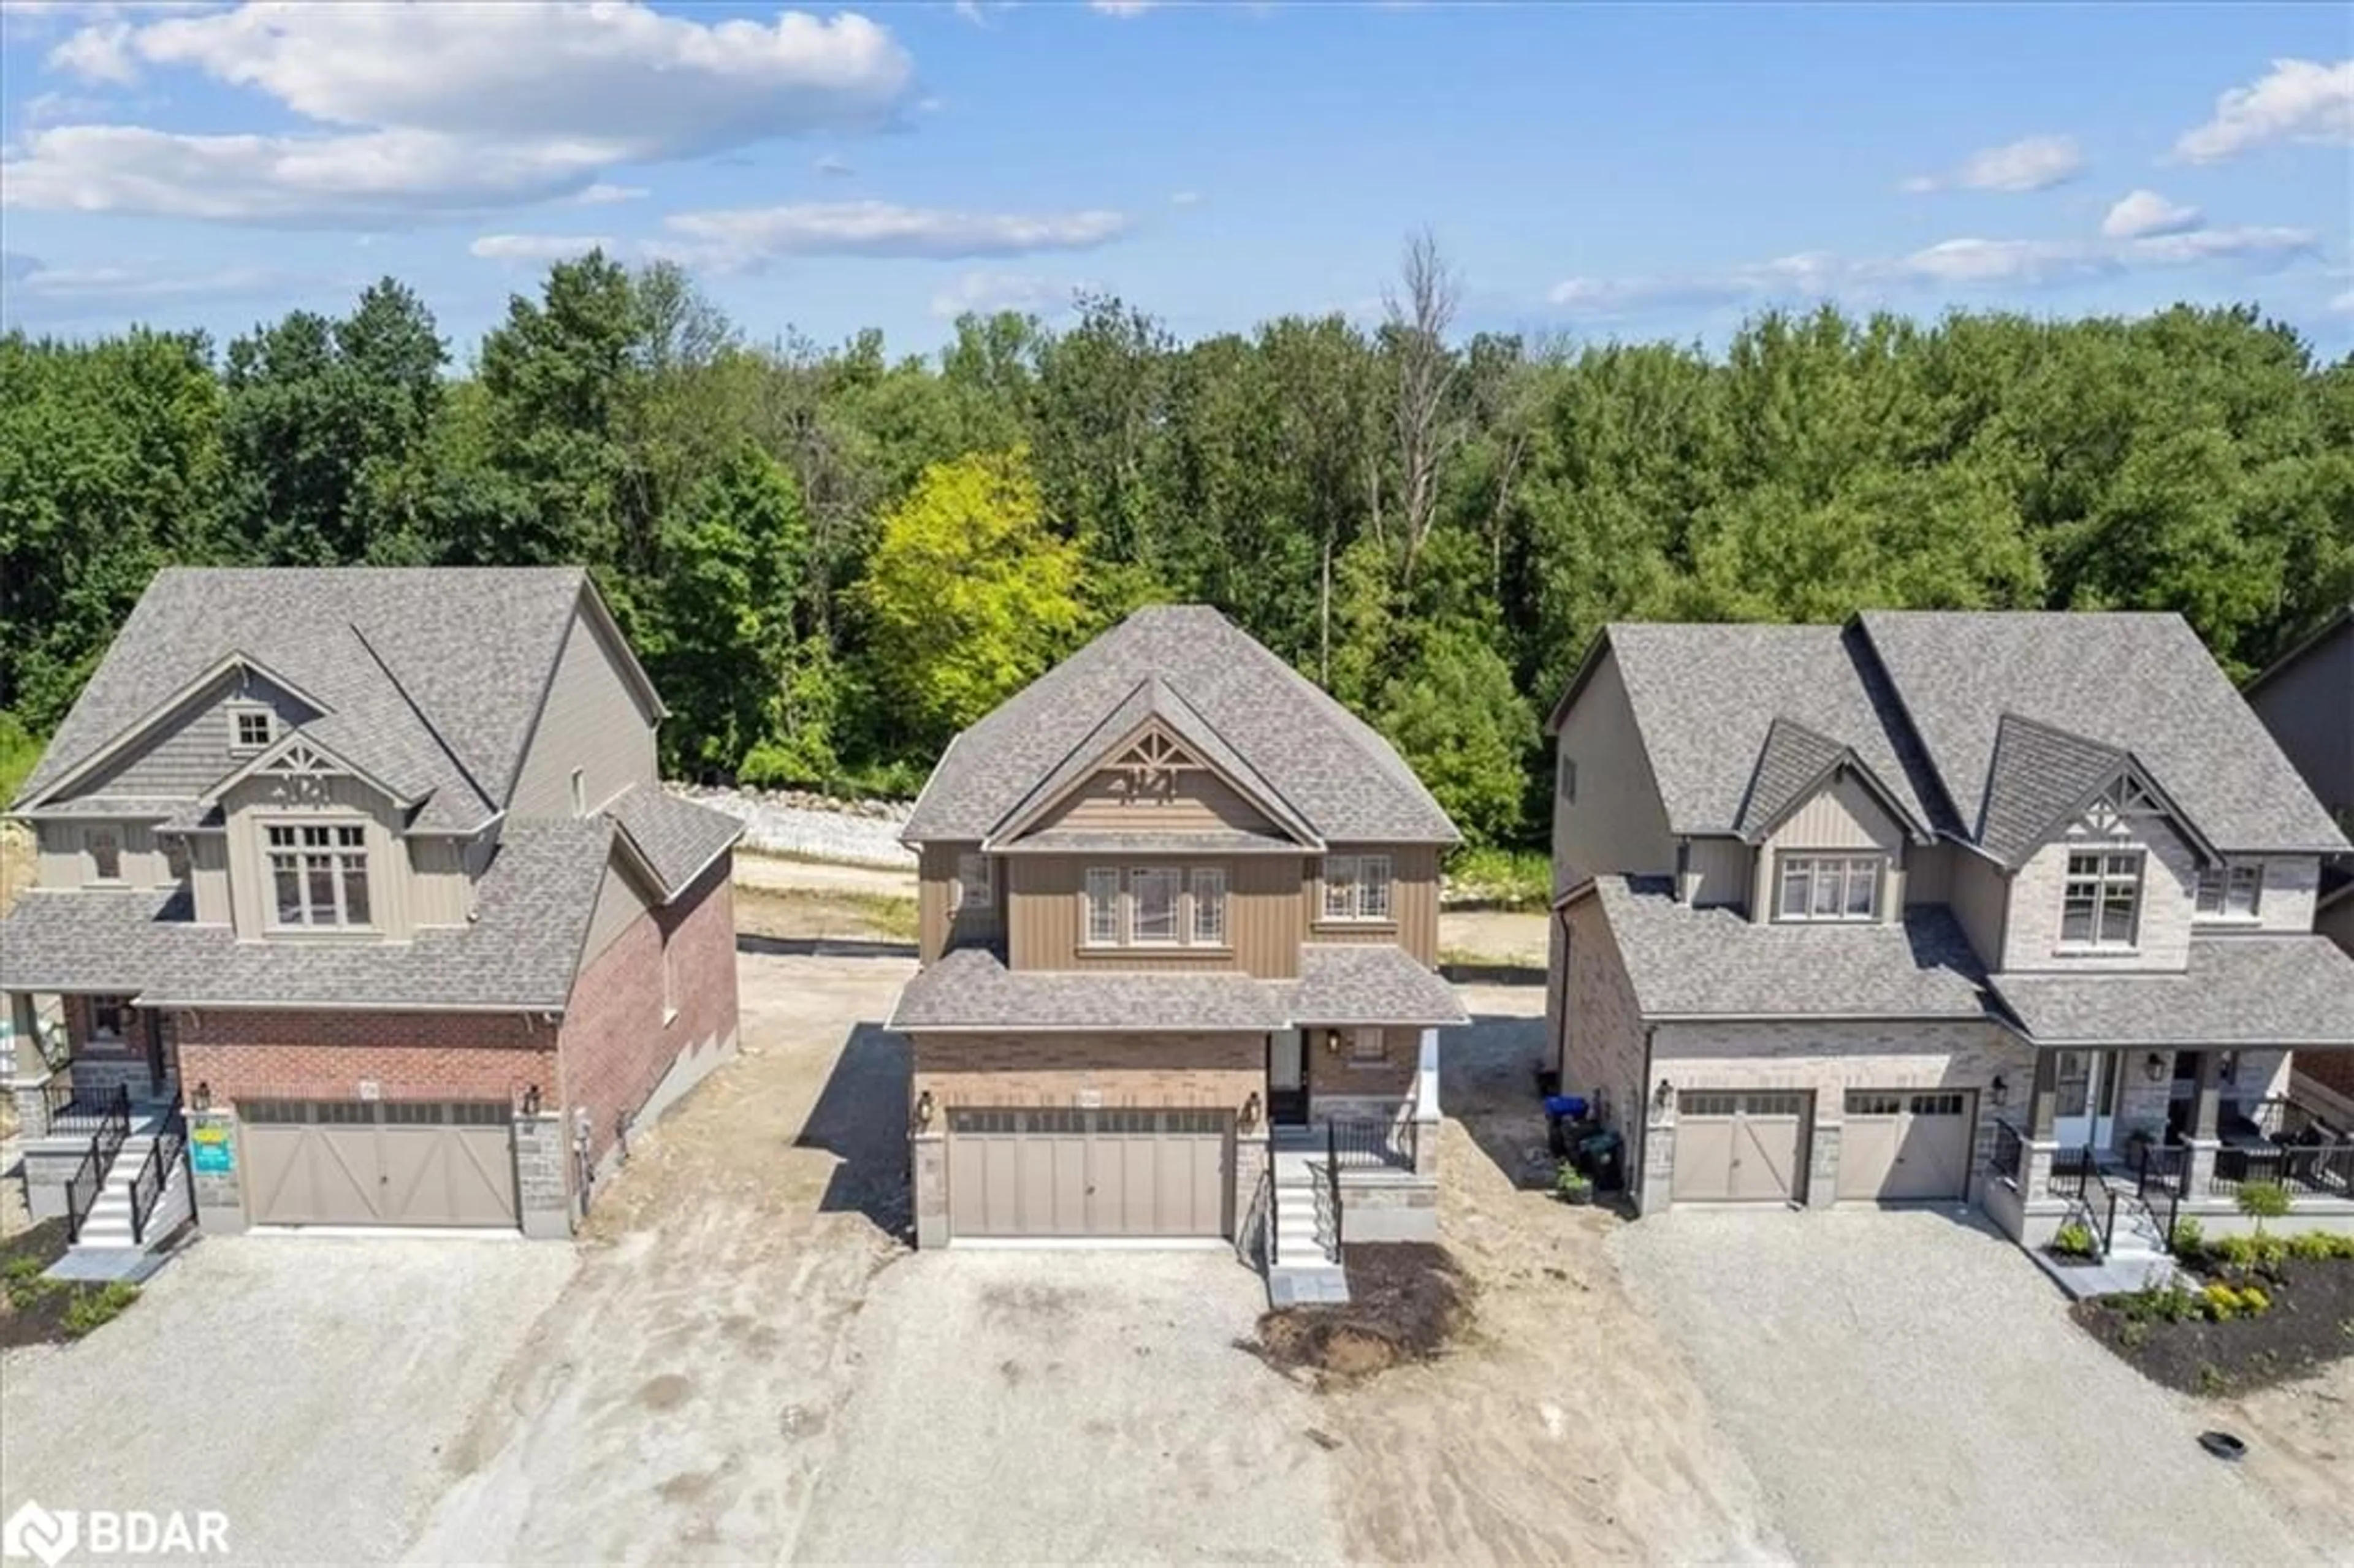 Frontside or backside of a home for 154 Plewes Dr, Collingwood Ontario L9Y 5M7